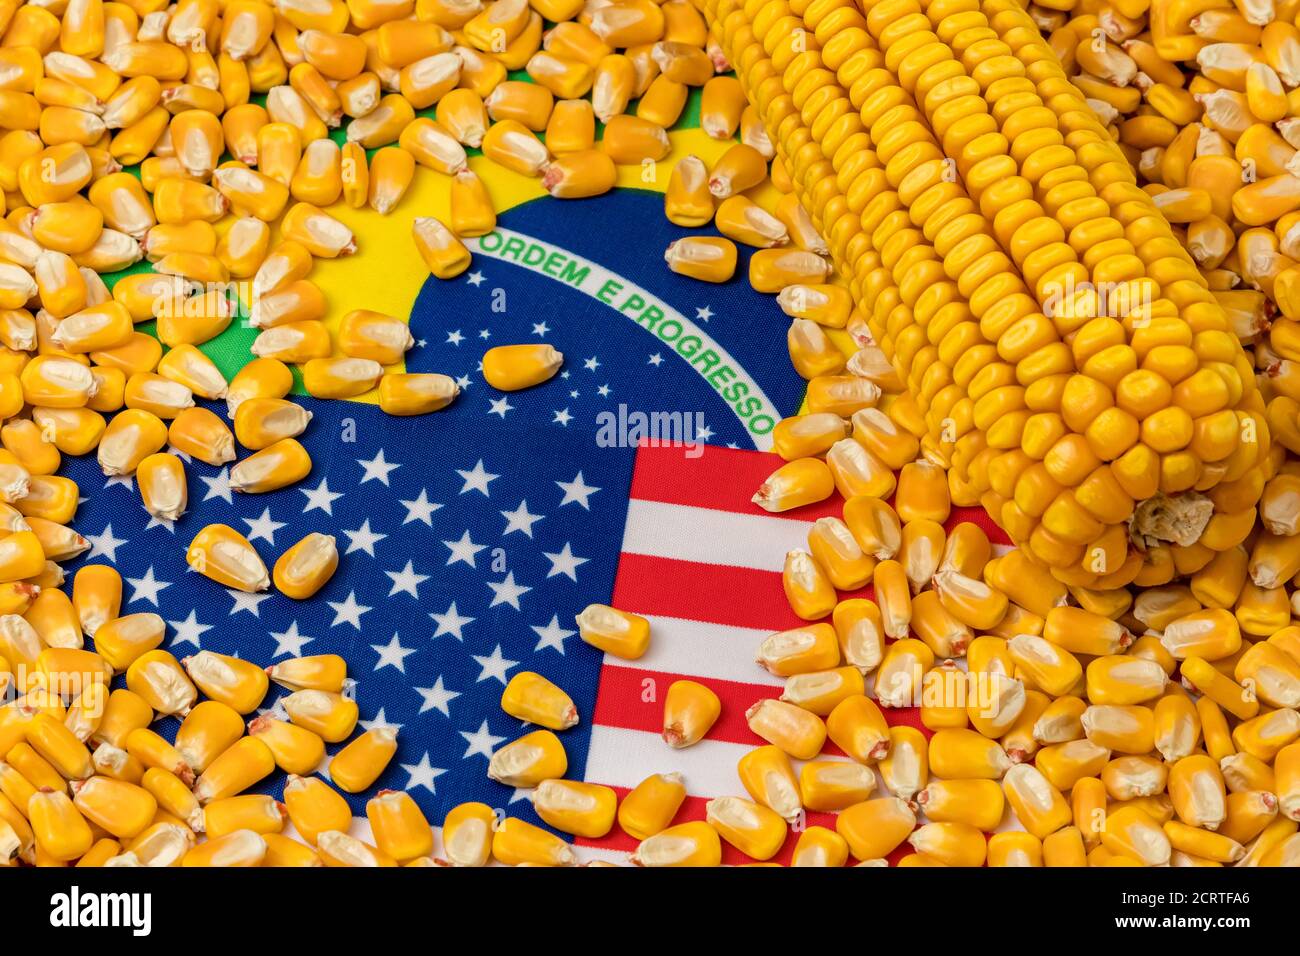 Flags of United States of America and Brazil covered in corn kernels. Concept of American and Brazilian agriculture imports, exports, trade war, agree Stock Photo